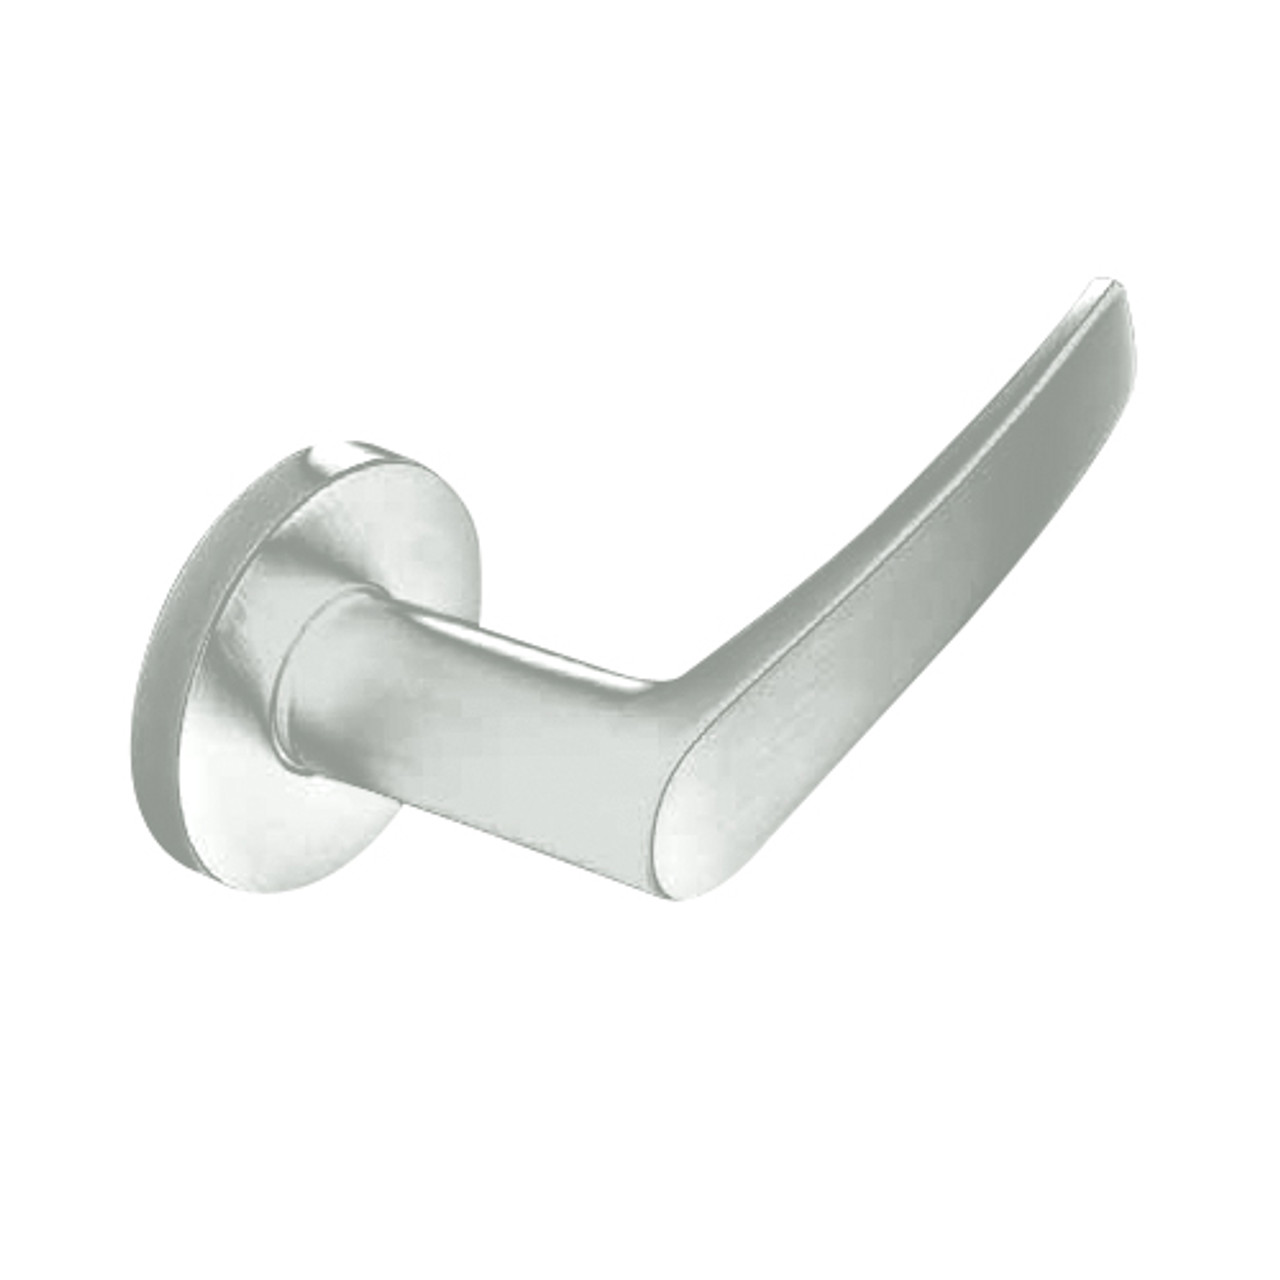 ML2060-ASB-618 Corbin Russwin ML2000 Series Mortise Privacy Locksets with Armstrong Lever in Bright Nickel